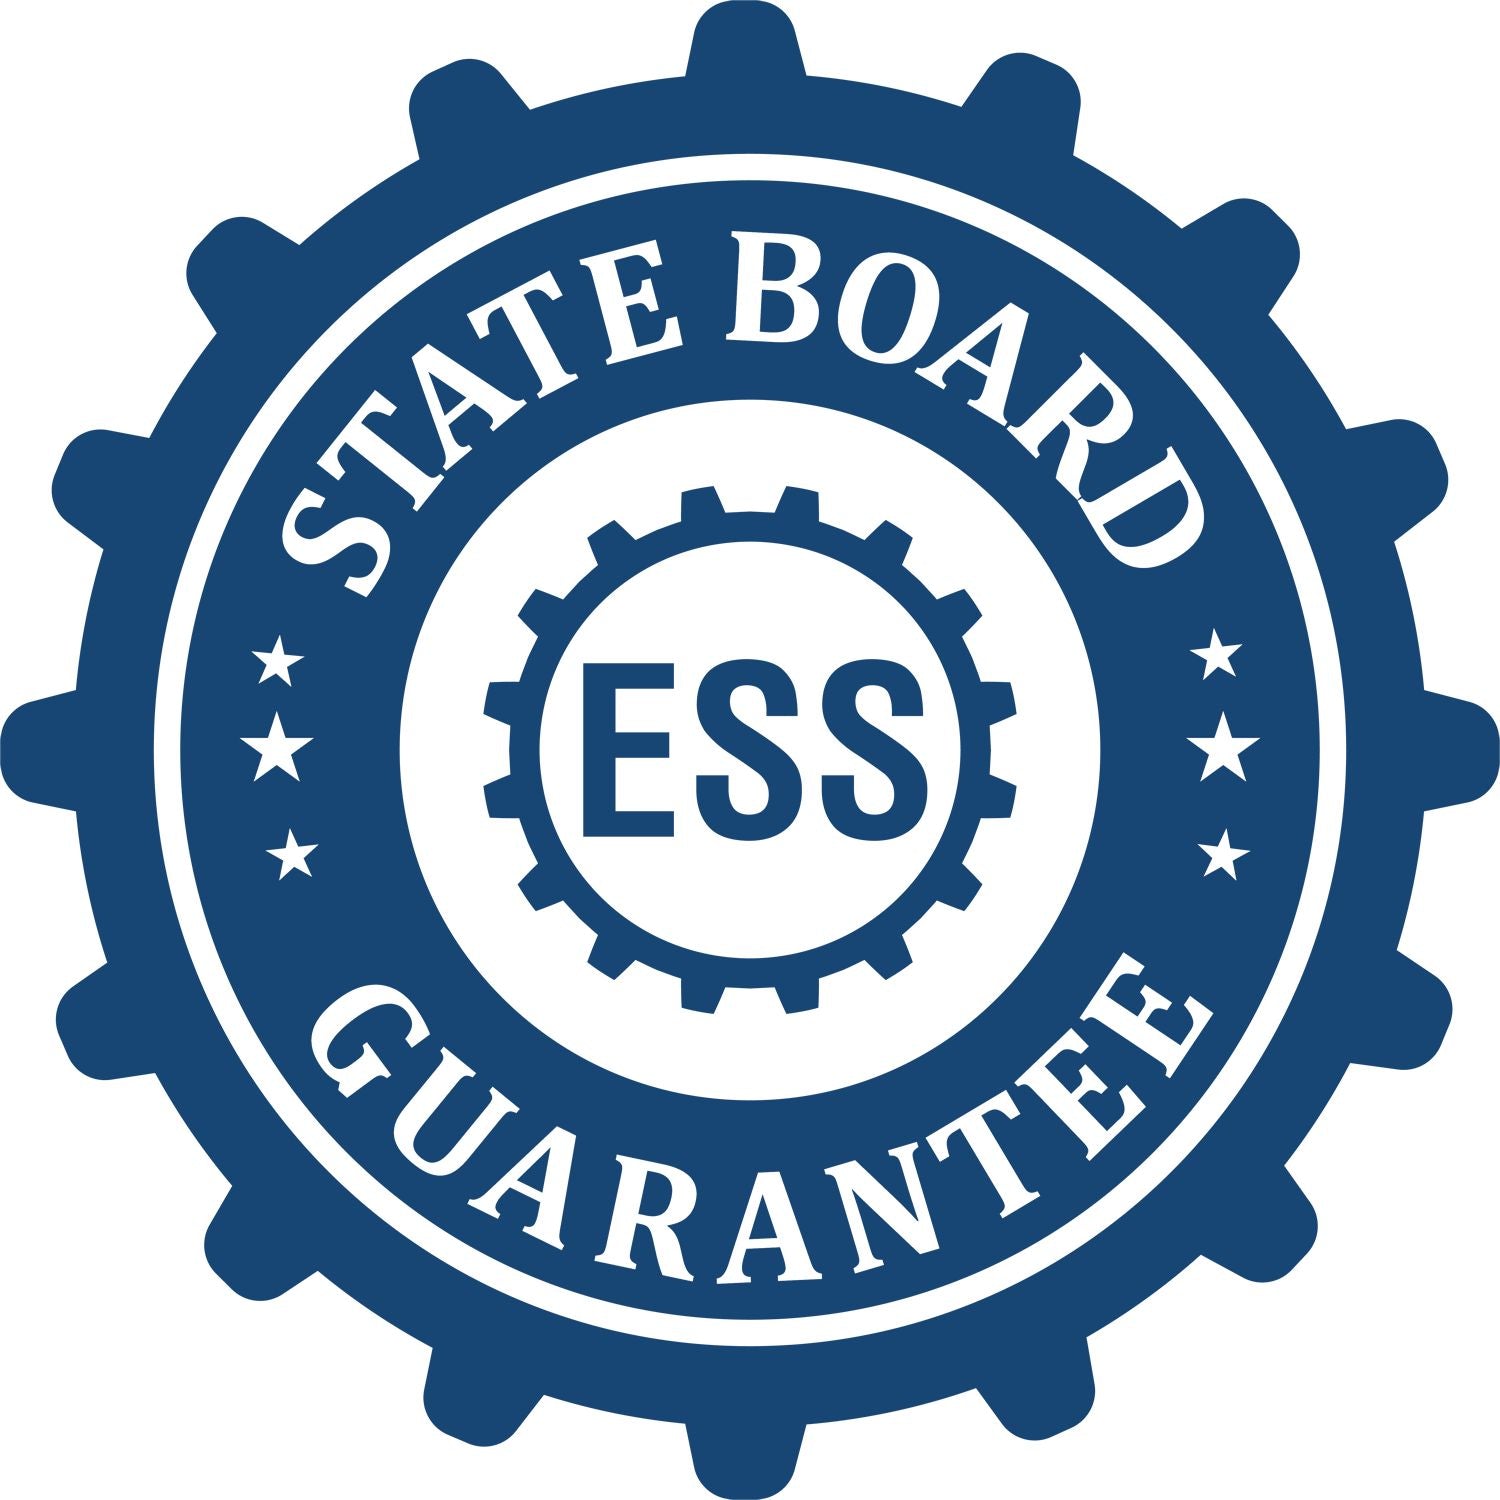 An emblem in a gear shape illustrating a state board guarantee for the Mississippi Professional Engineer Seal Stamp product.